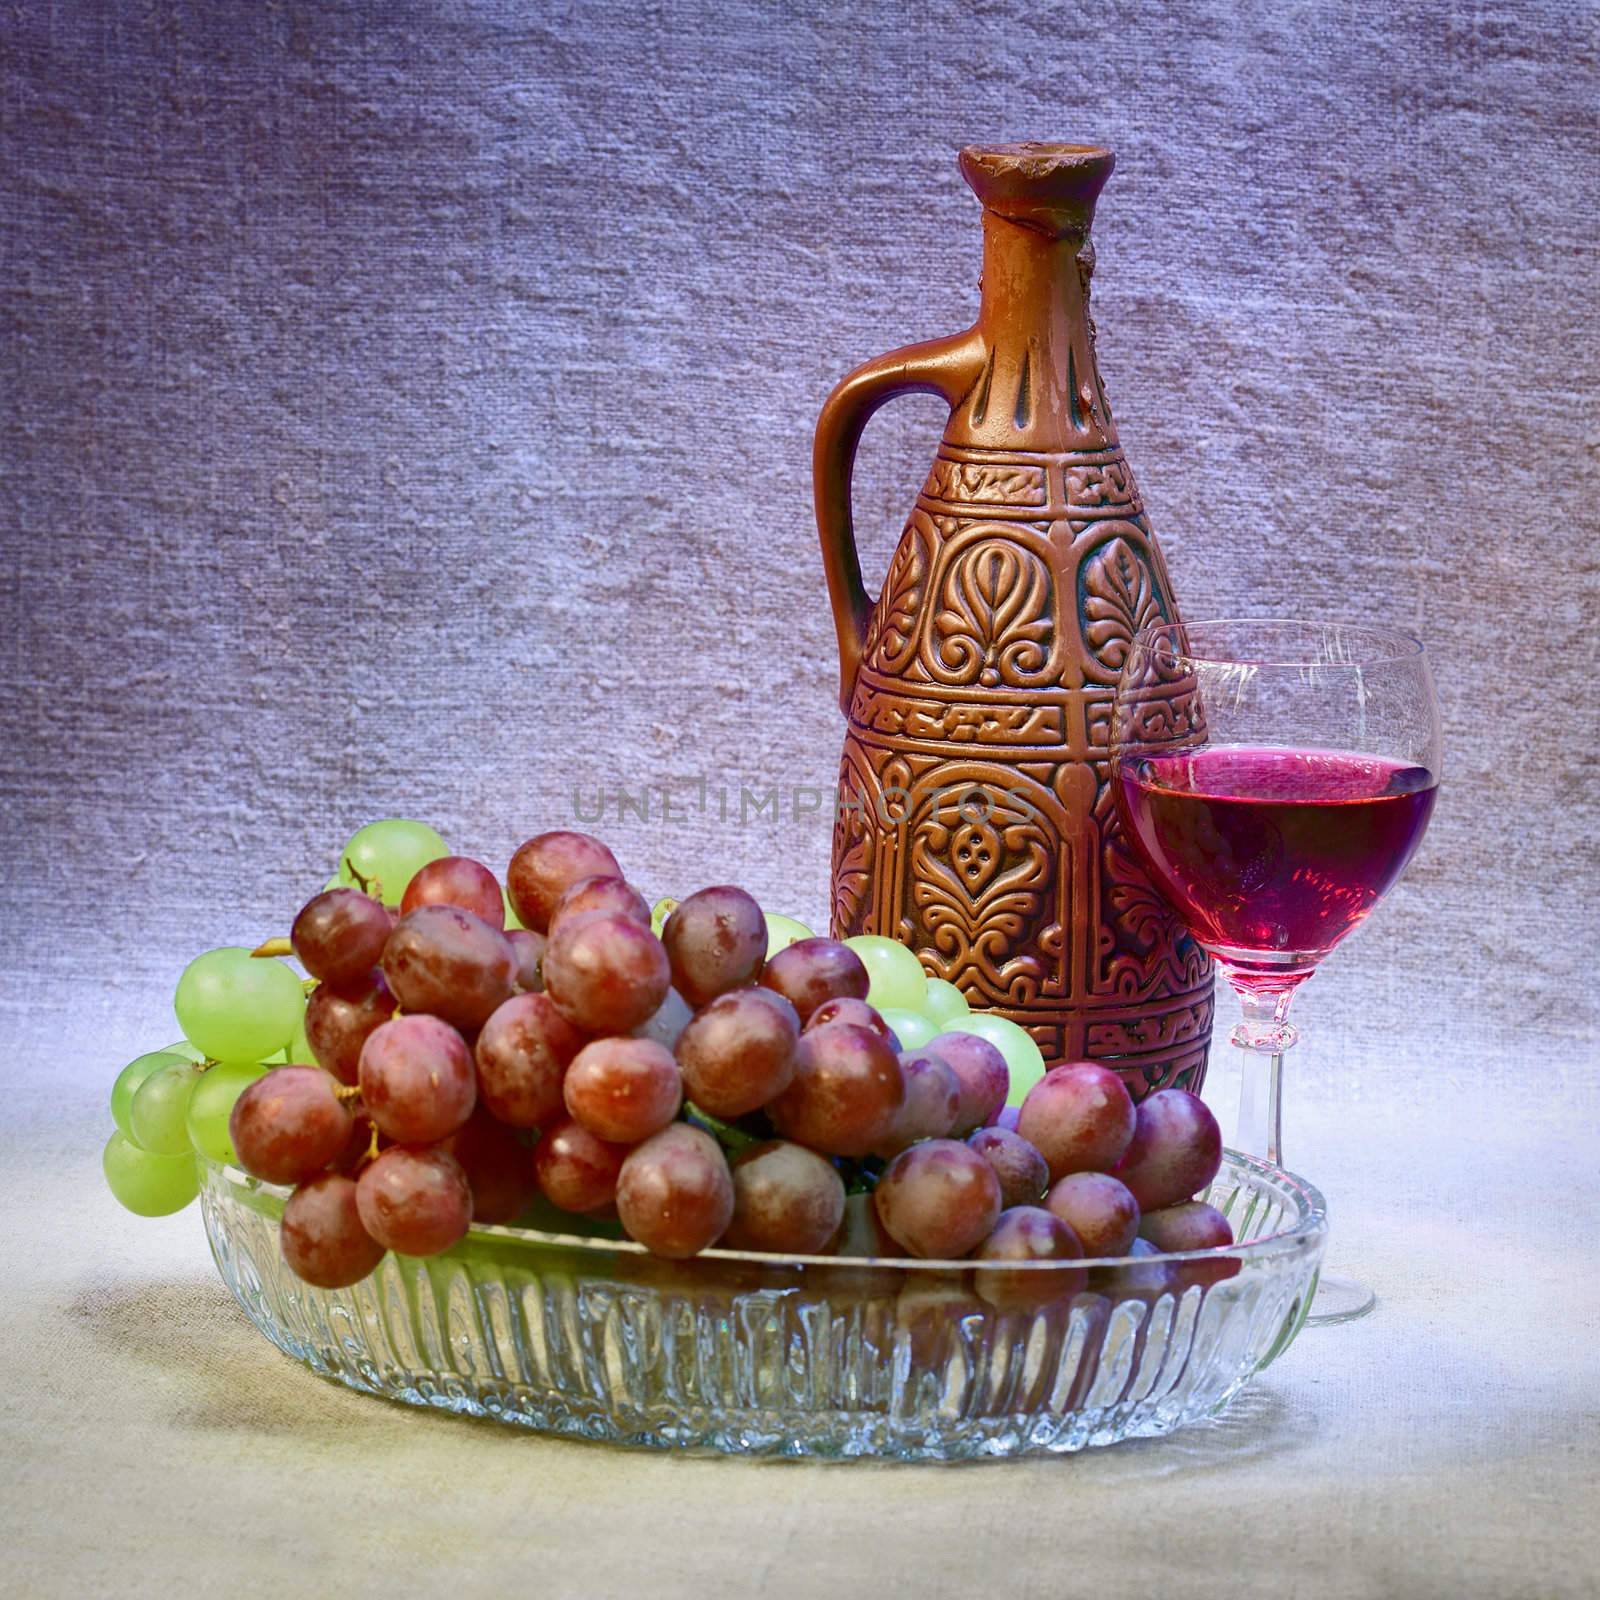 Still-life with a clay bottle, grapes and a glass